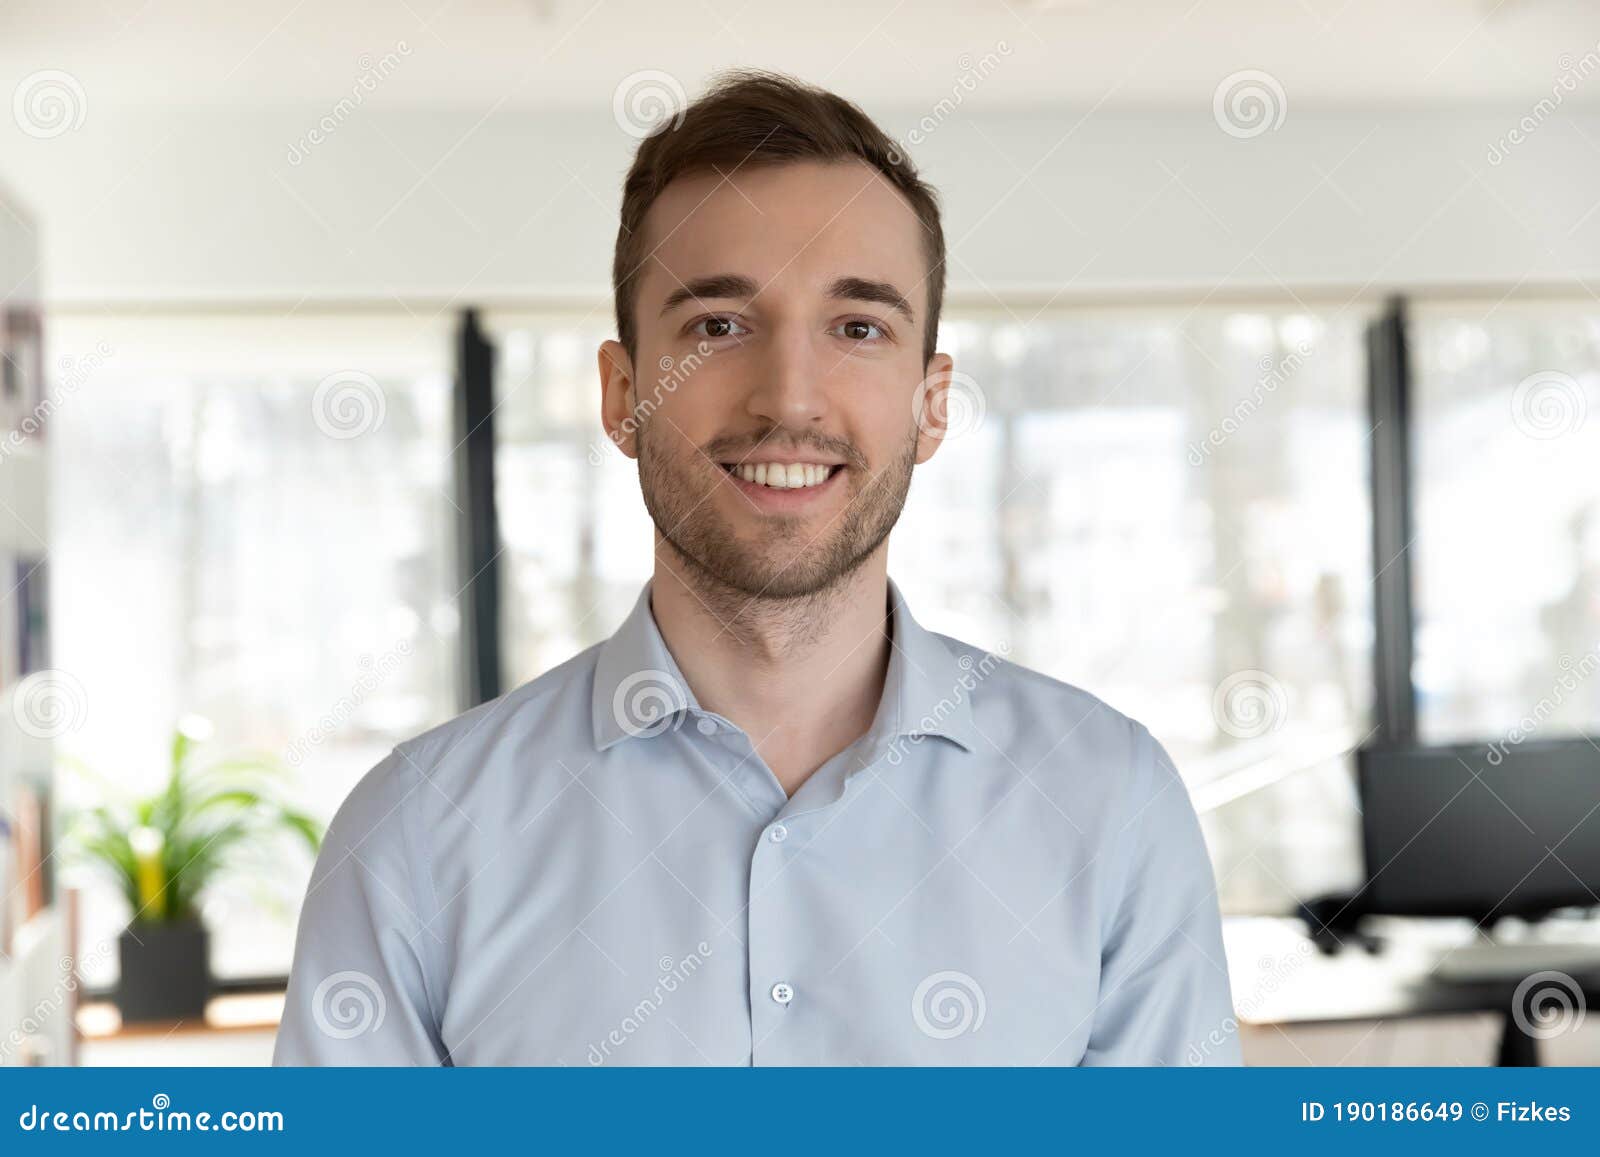 profile picture of caucasian male employee posing in office